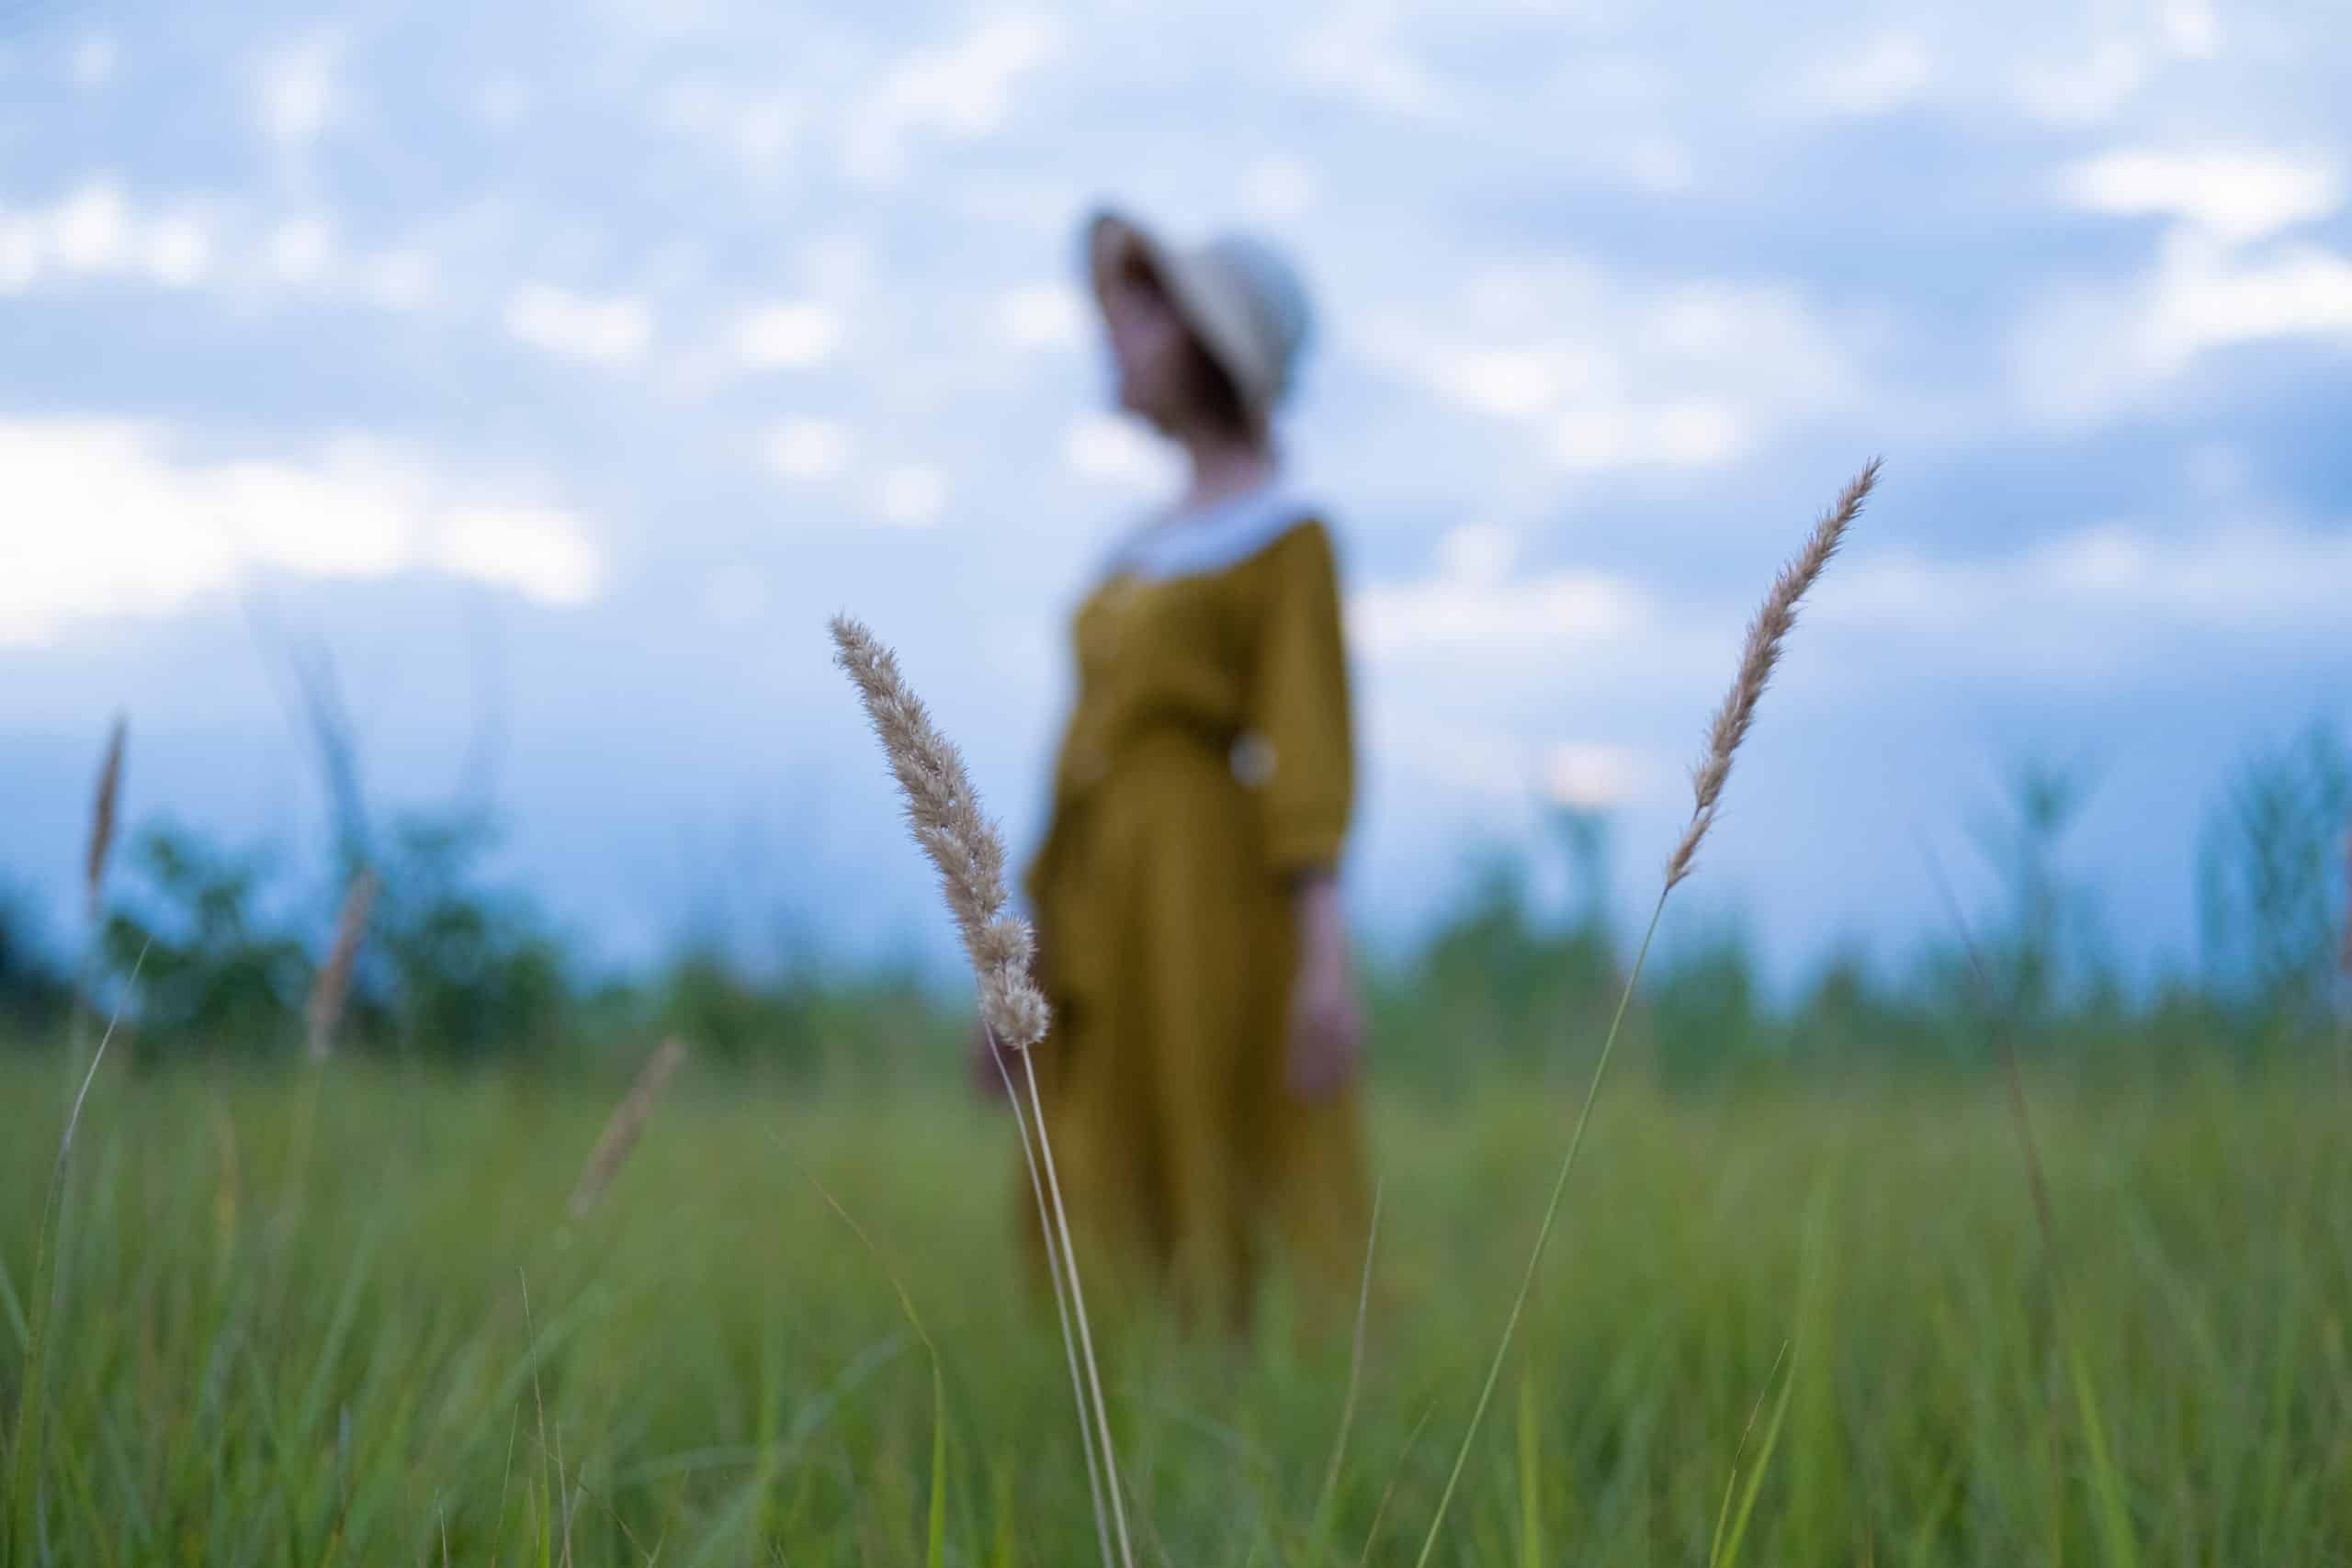 Melancholic woman wearing a dress and sunhat standing in the middle of grass field.